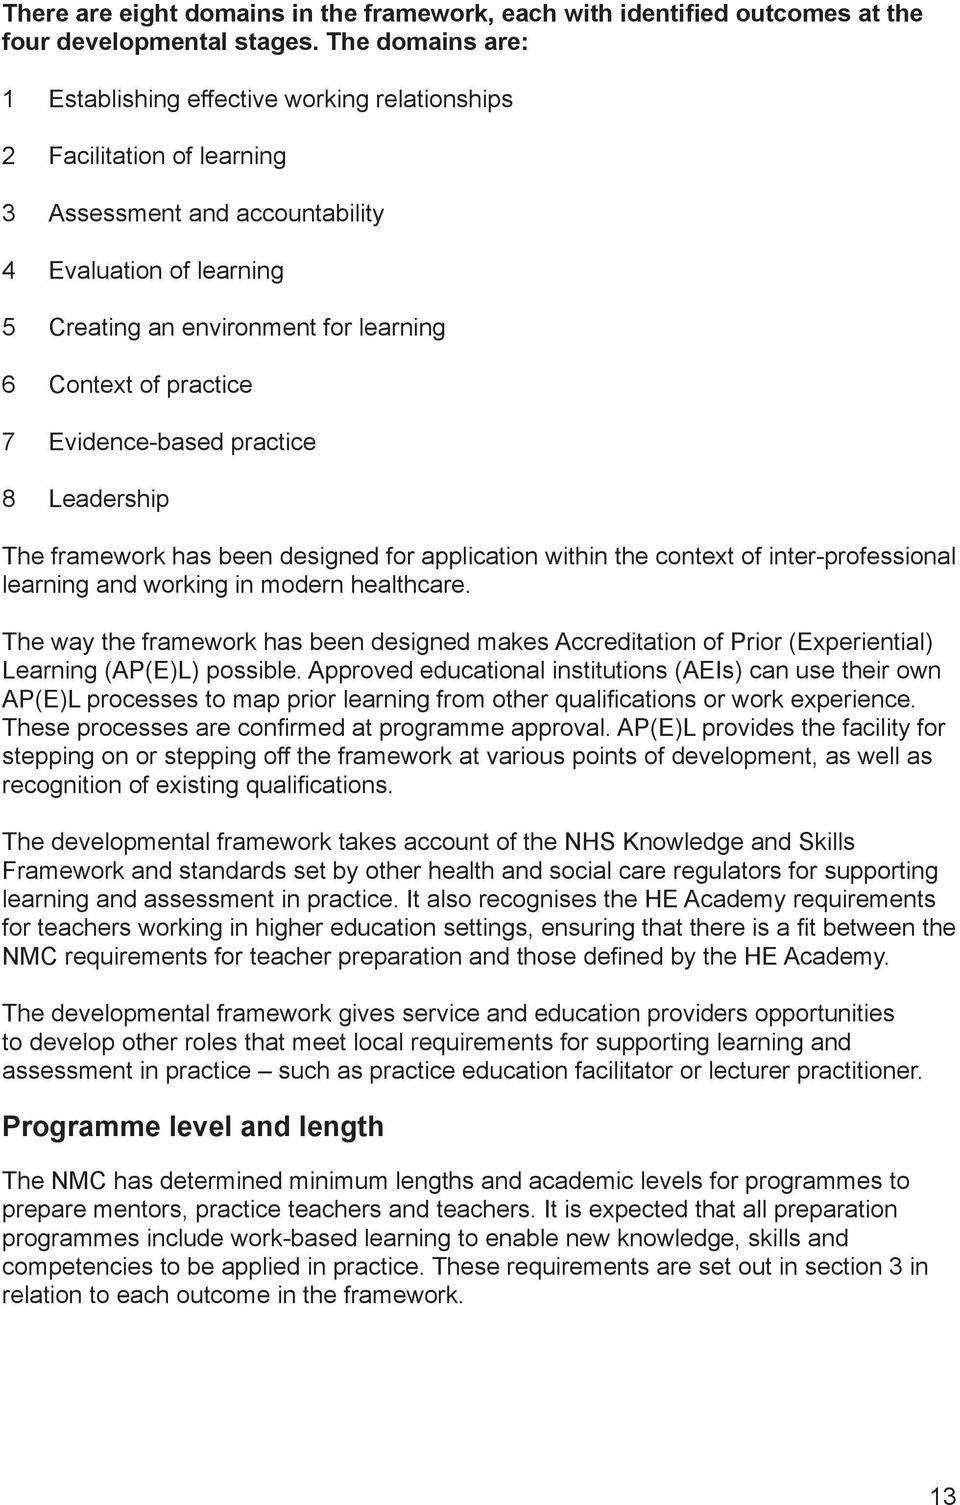 practice 7 Evidence-based practice 8 Leadership The framework has been designed for application within the context of inter-professional learning and working in modern healthcare.